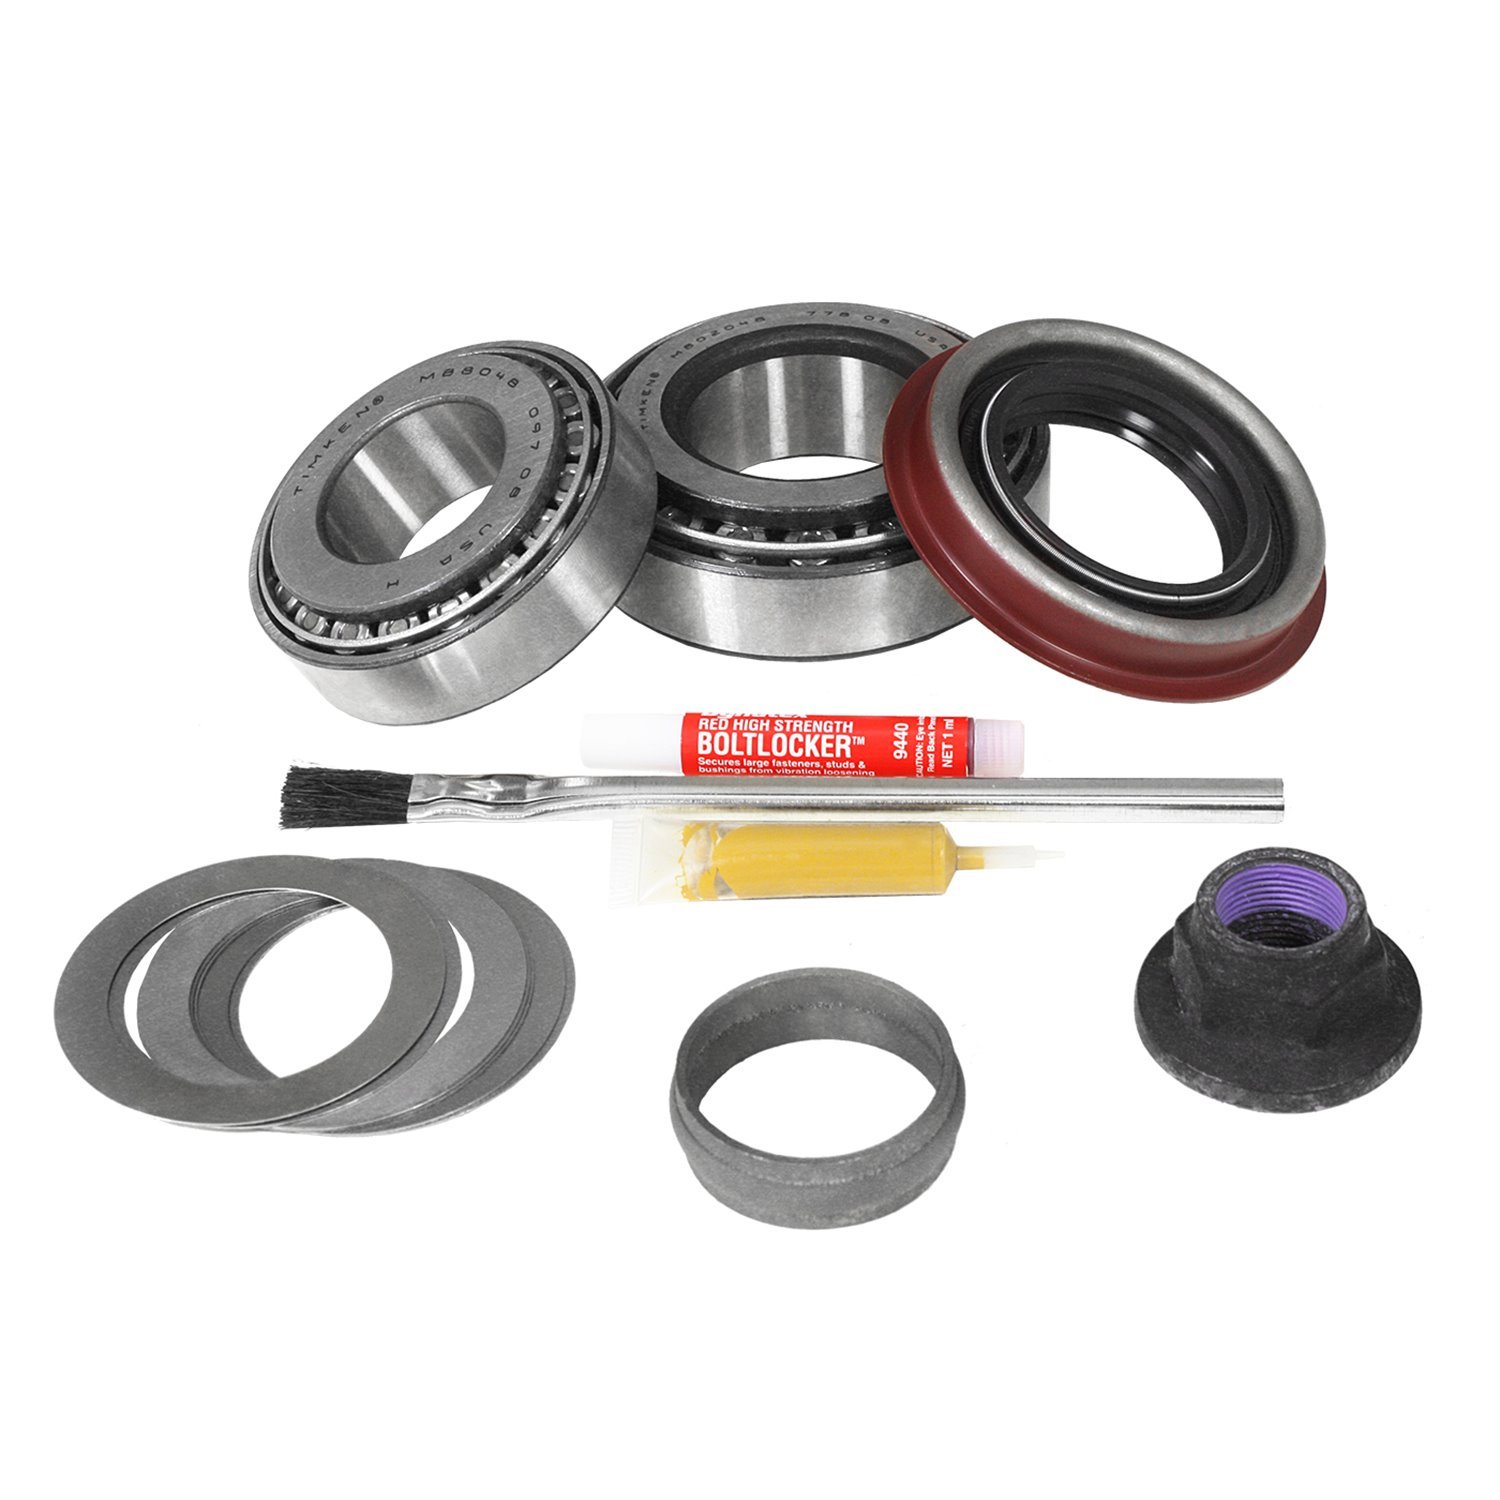 Pinion Install Kit For 2015 & Up Mustang & F150 8.8 in. Rear